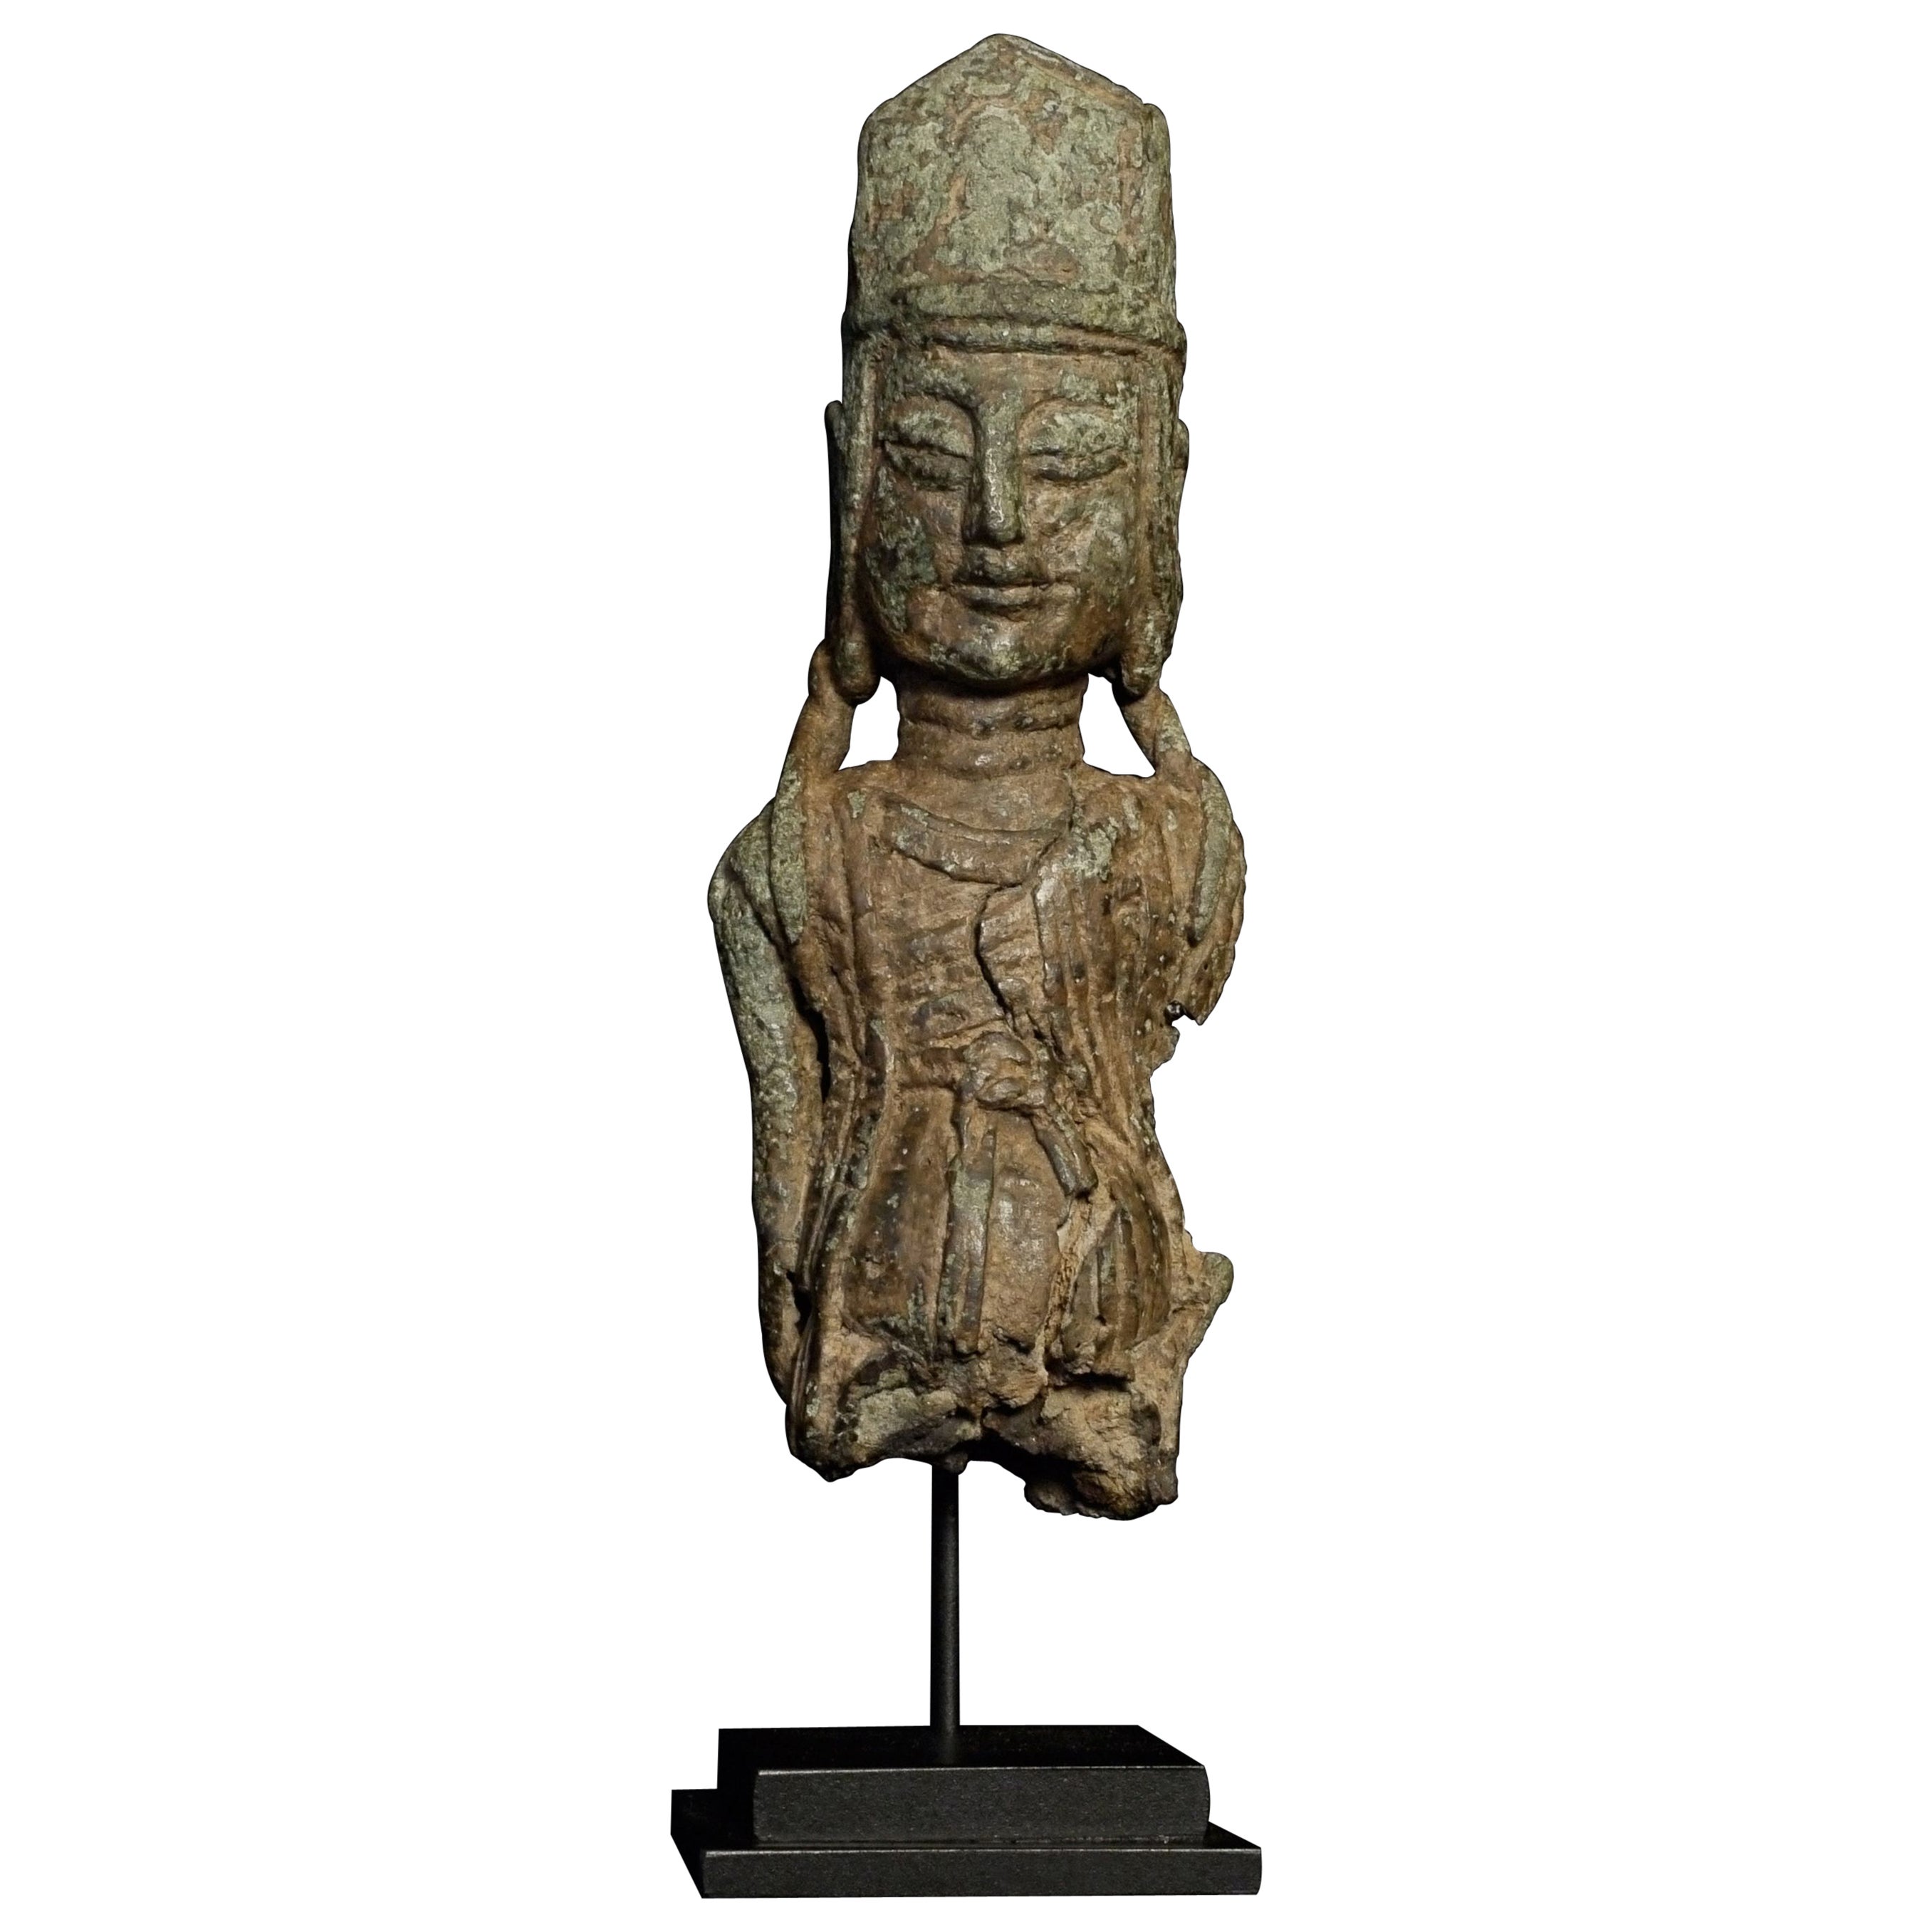 Early Chinese/Silk Road. Bust alone stands 7.5 inches tall. The crown, face, and overall look suggest an extremely early dating-possibly over 1000 years old. . Extremely powerful presence. Would have stood over 15 inches tall!!- Worthy of further